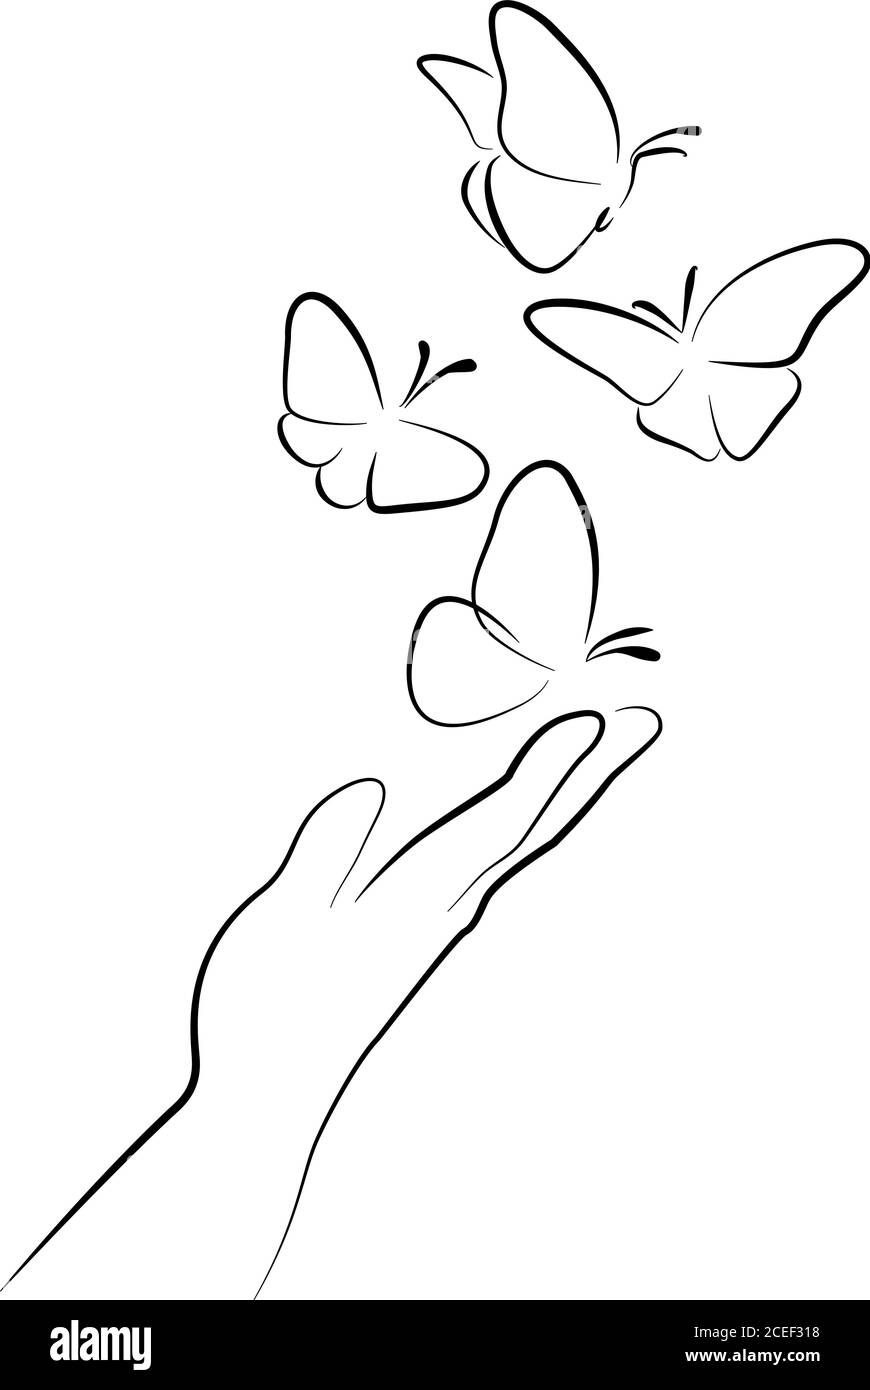 https://c8.alamy.com/comp/2CEF318/hand-with-butterfly-on-finger-line-art-drawing-style-with-different-thickness-black-linear-sketch-isolated-on-white-background-vector-illustration-2CEF318.jpg